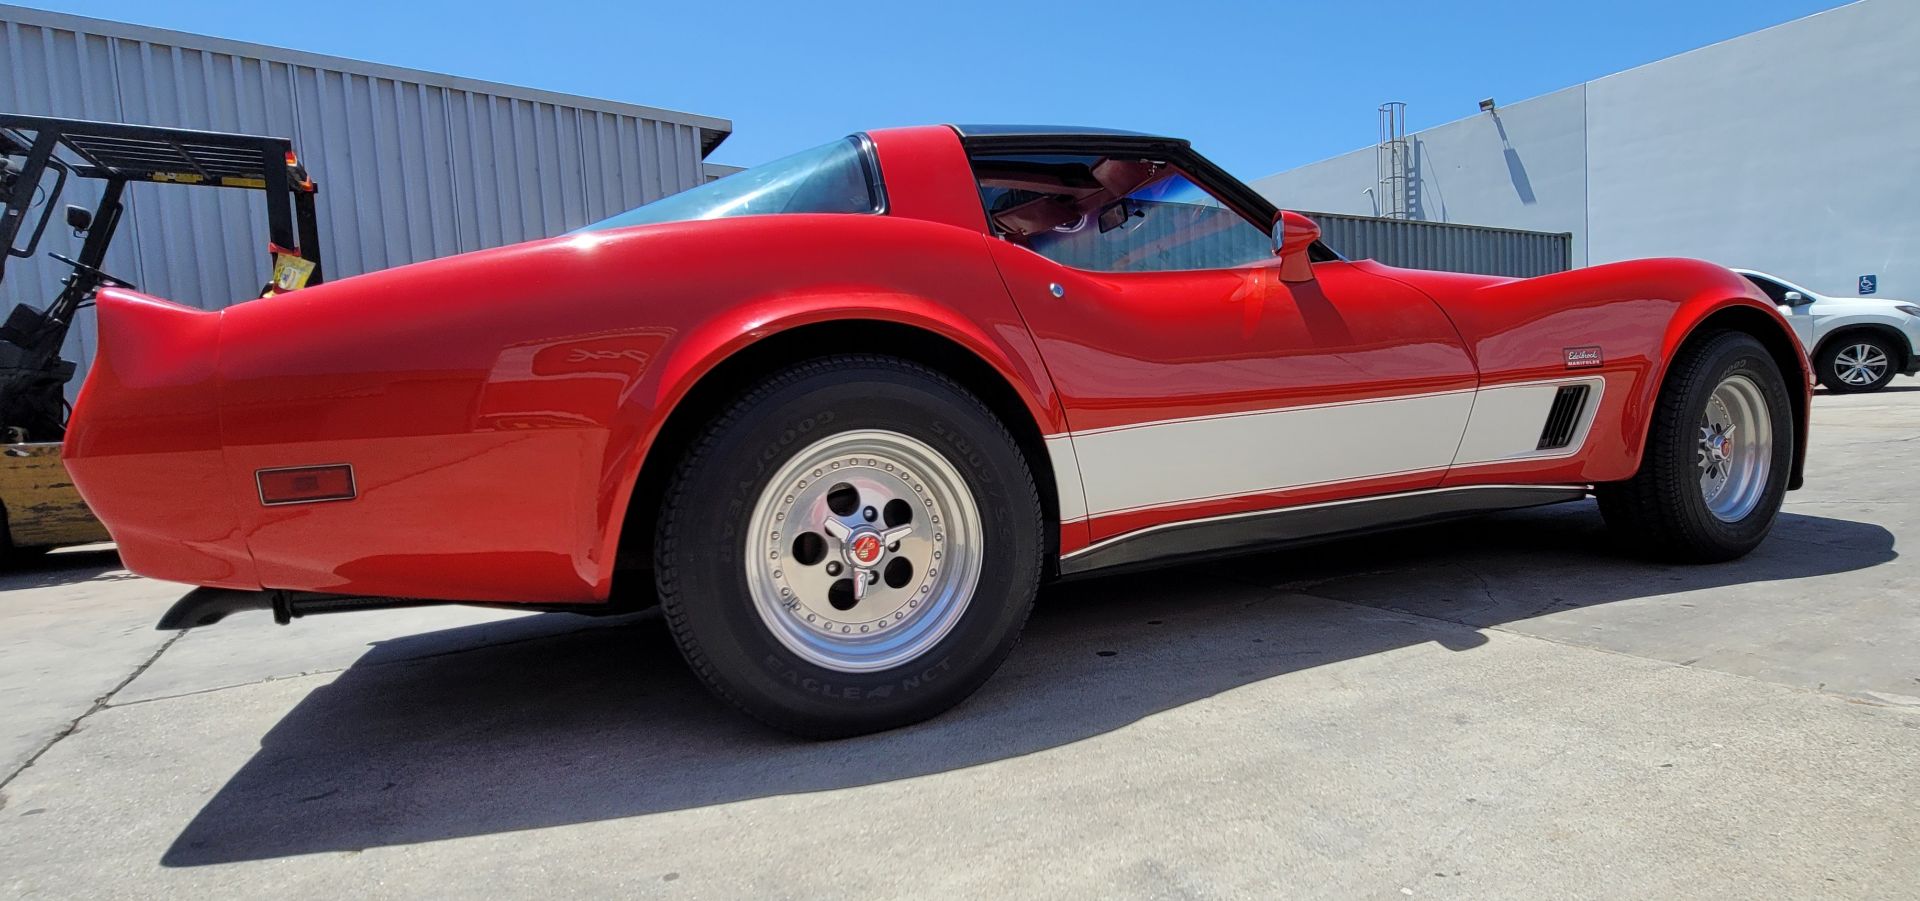 1980 CHEVROLET CORVETTE, WAS VIC EDELBROCK'S PERSONAL CAR BOUGHT FOR R&D, RED INTERIOR, TITLE ONLY. - Image 12 of 70